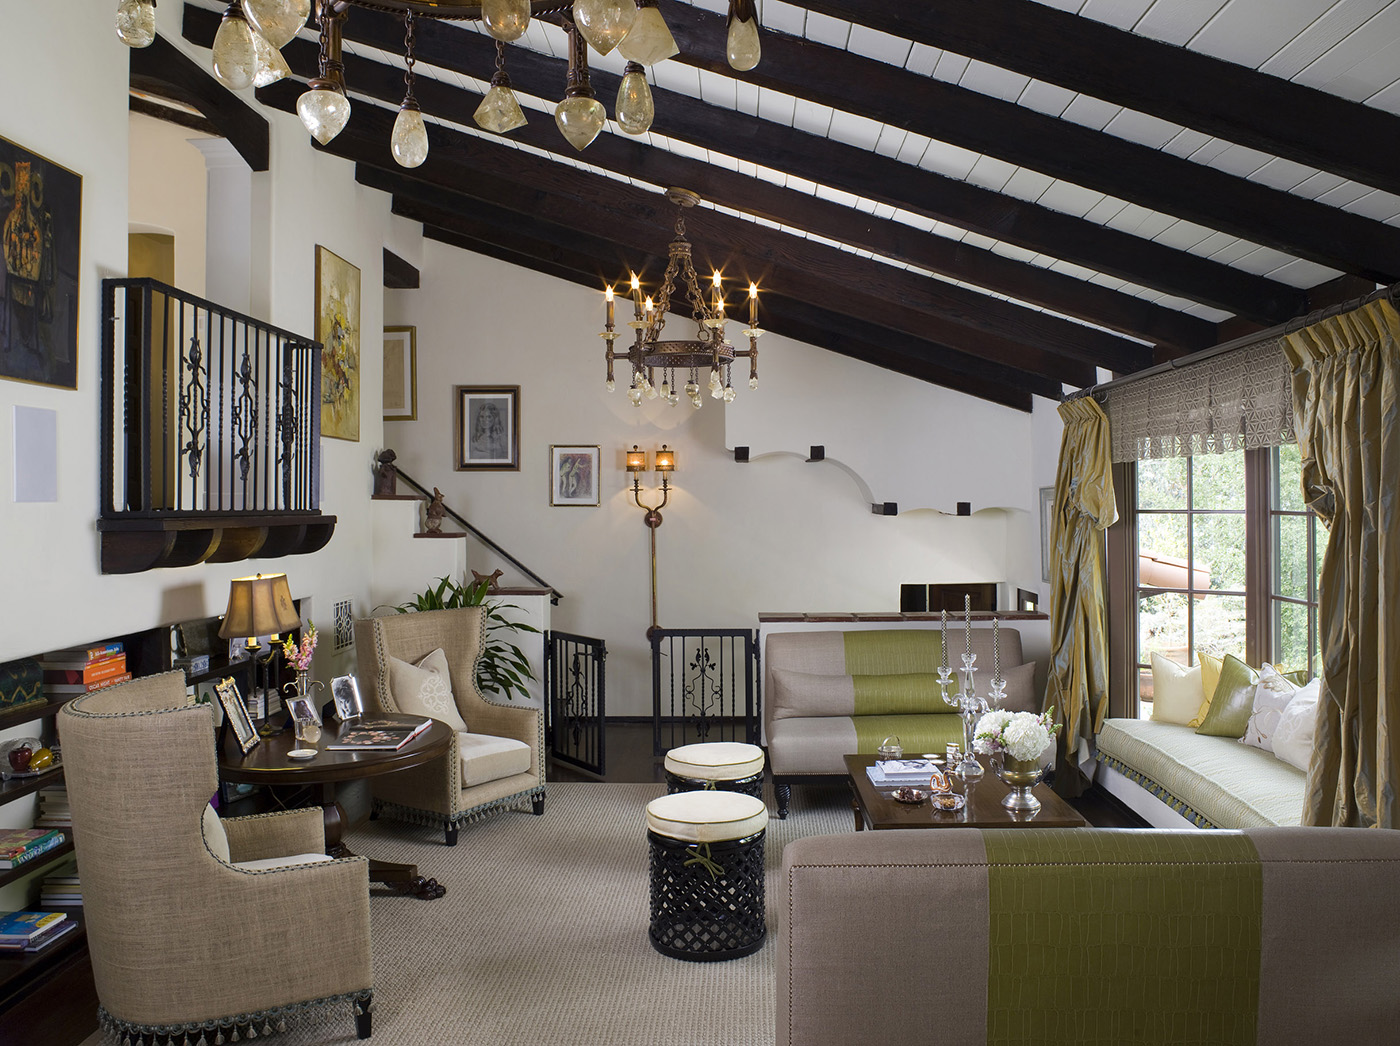 hip hacienda with traditional wooden beam ceilings and groovy lime green design details